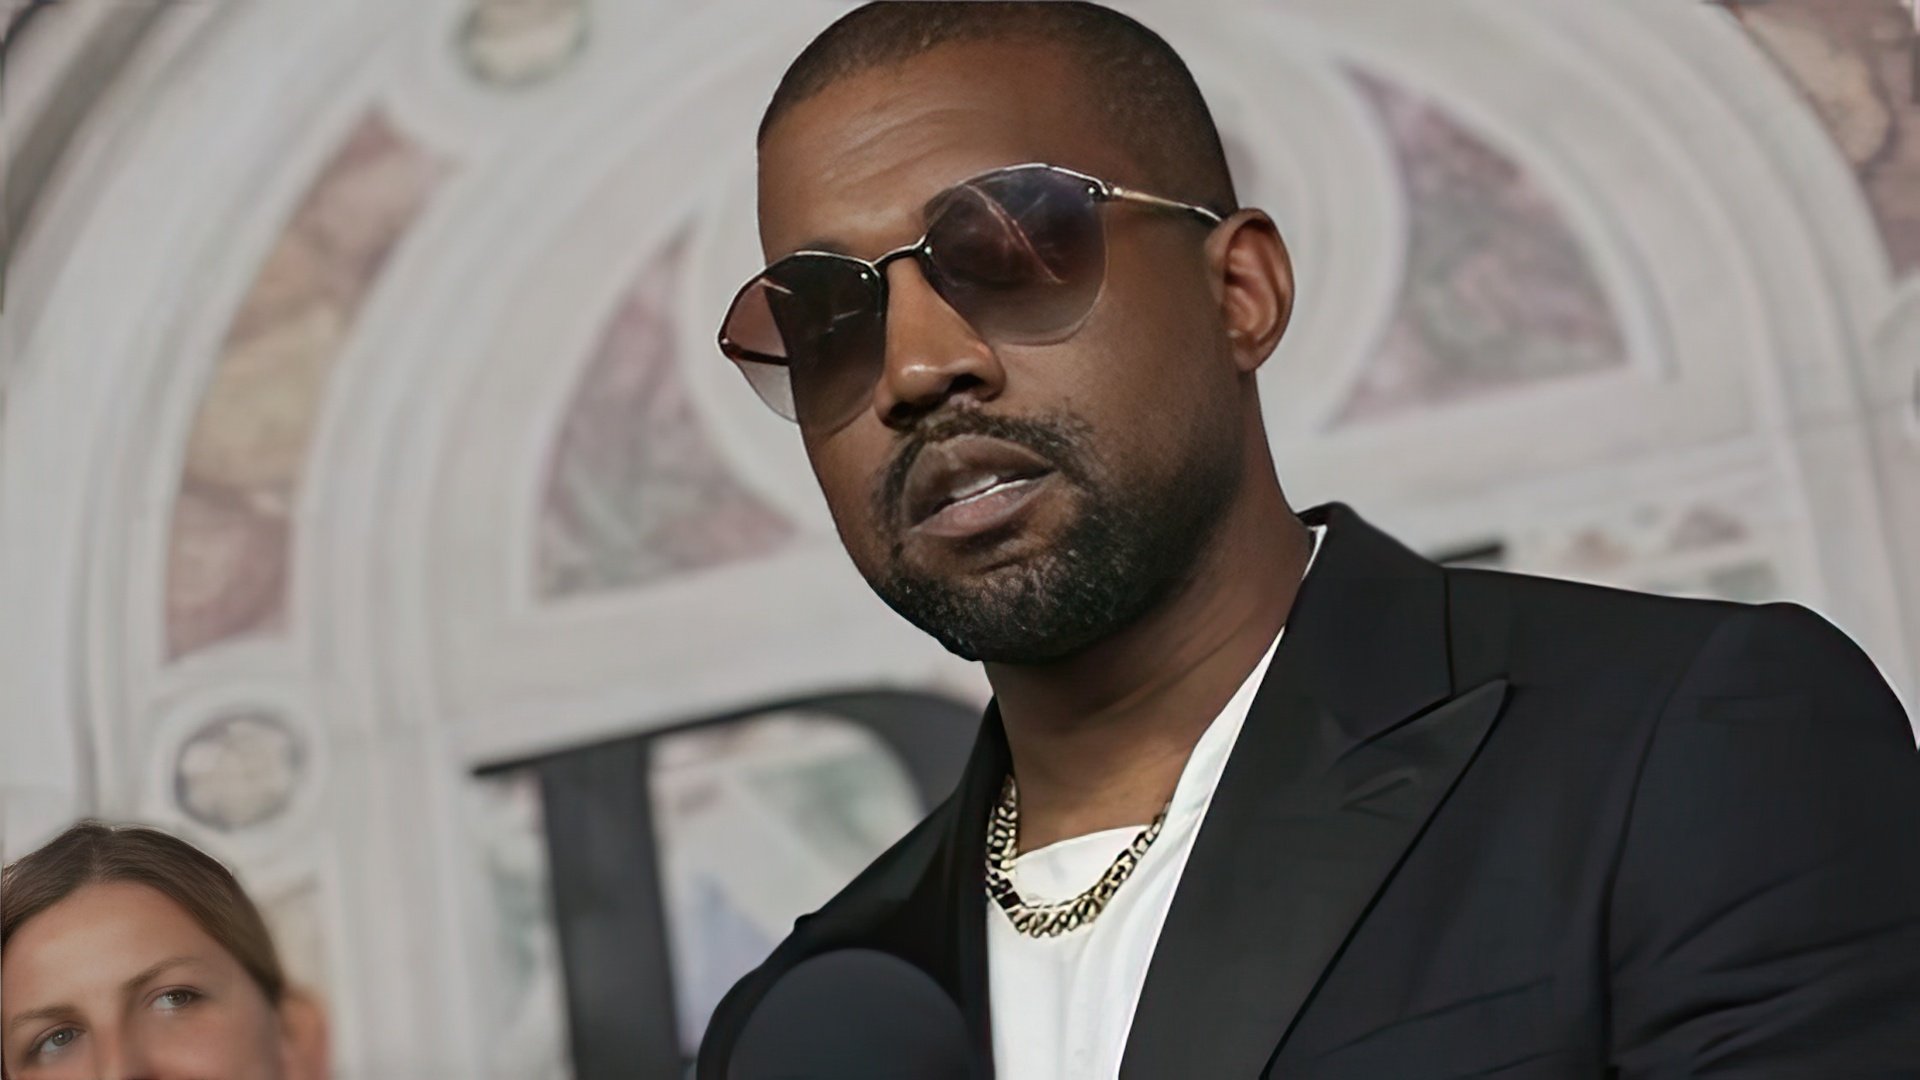 Kanye West says about his desire to become the president